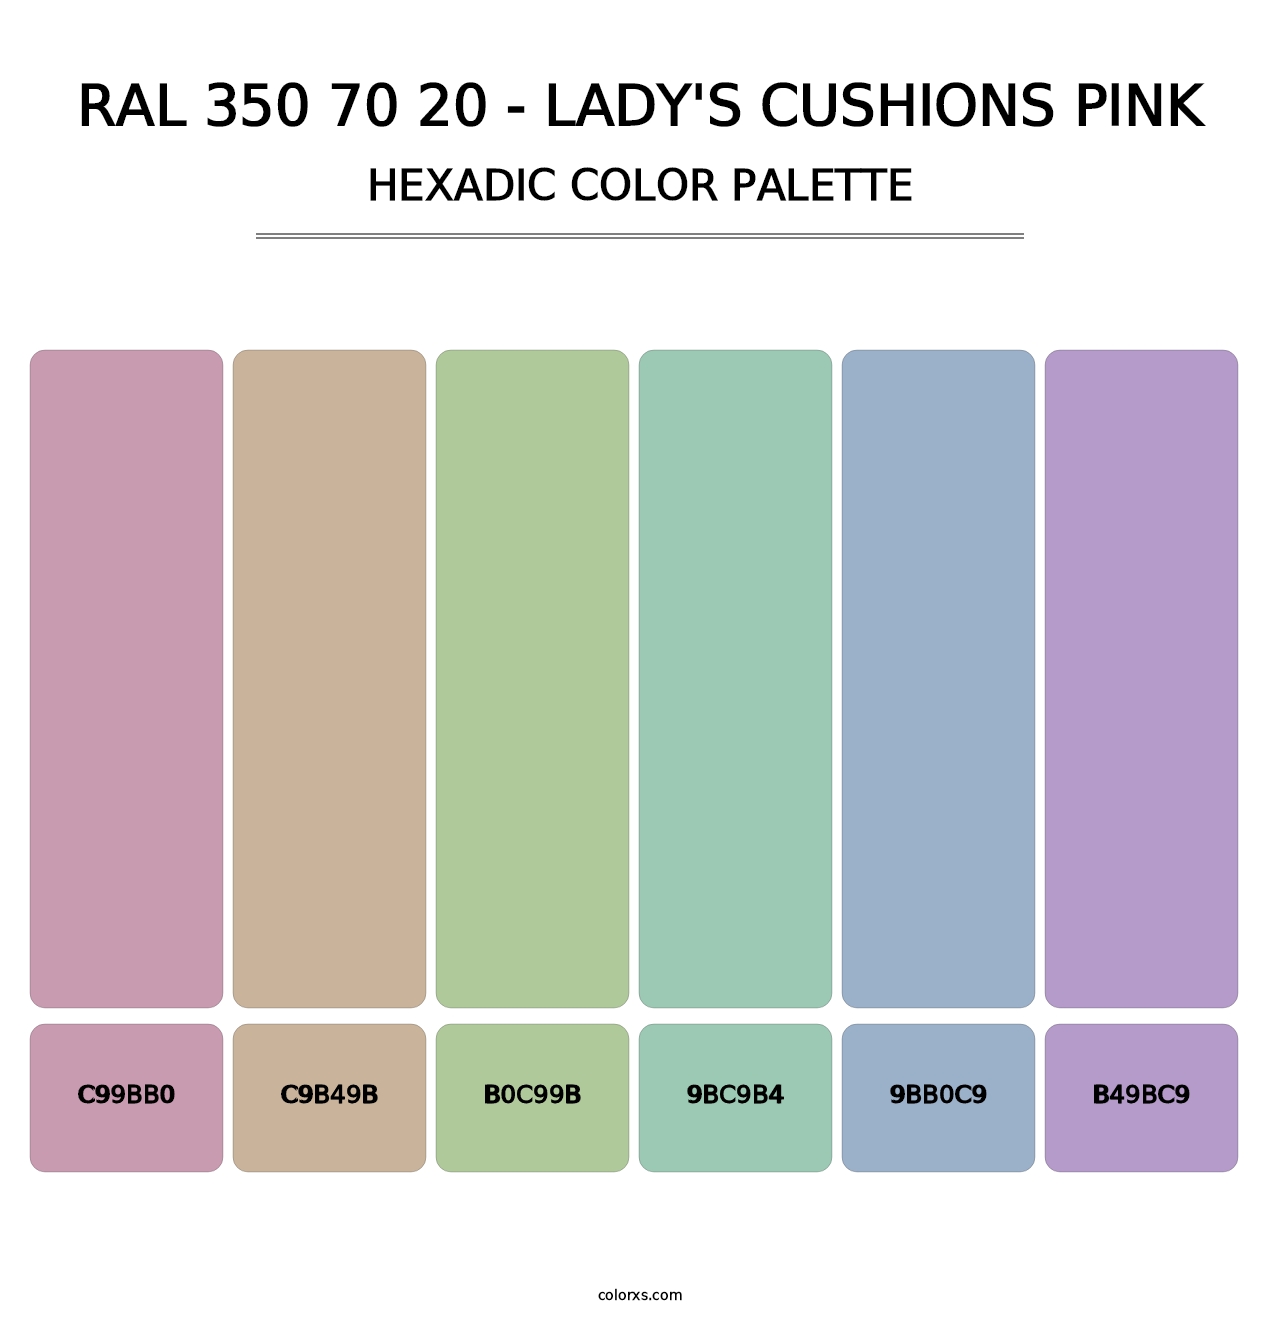 RAL 350 70 20 - Lady's Cushions Pink - Hexadic Color Palette